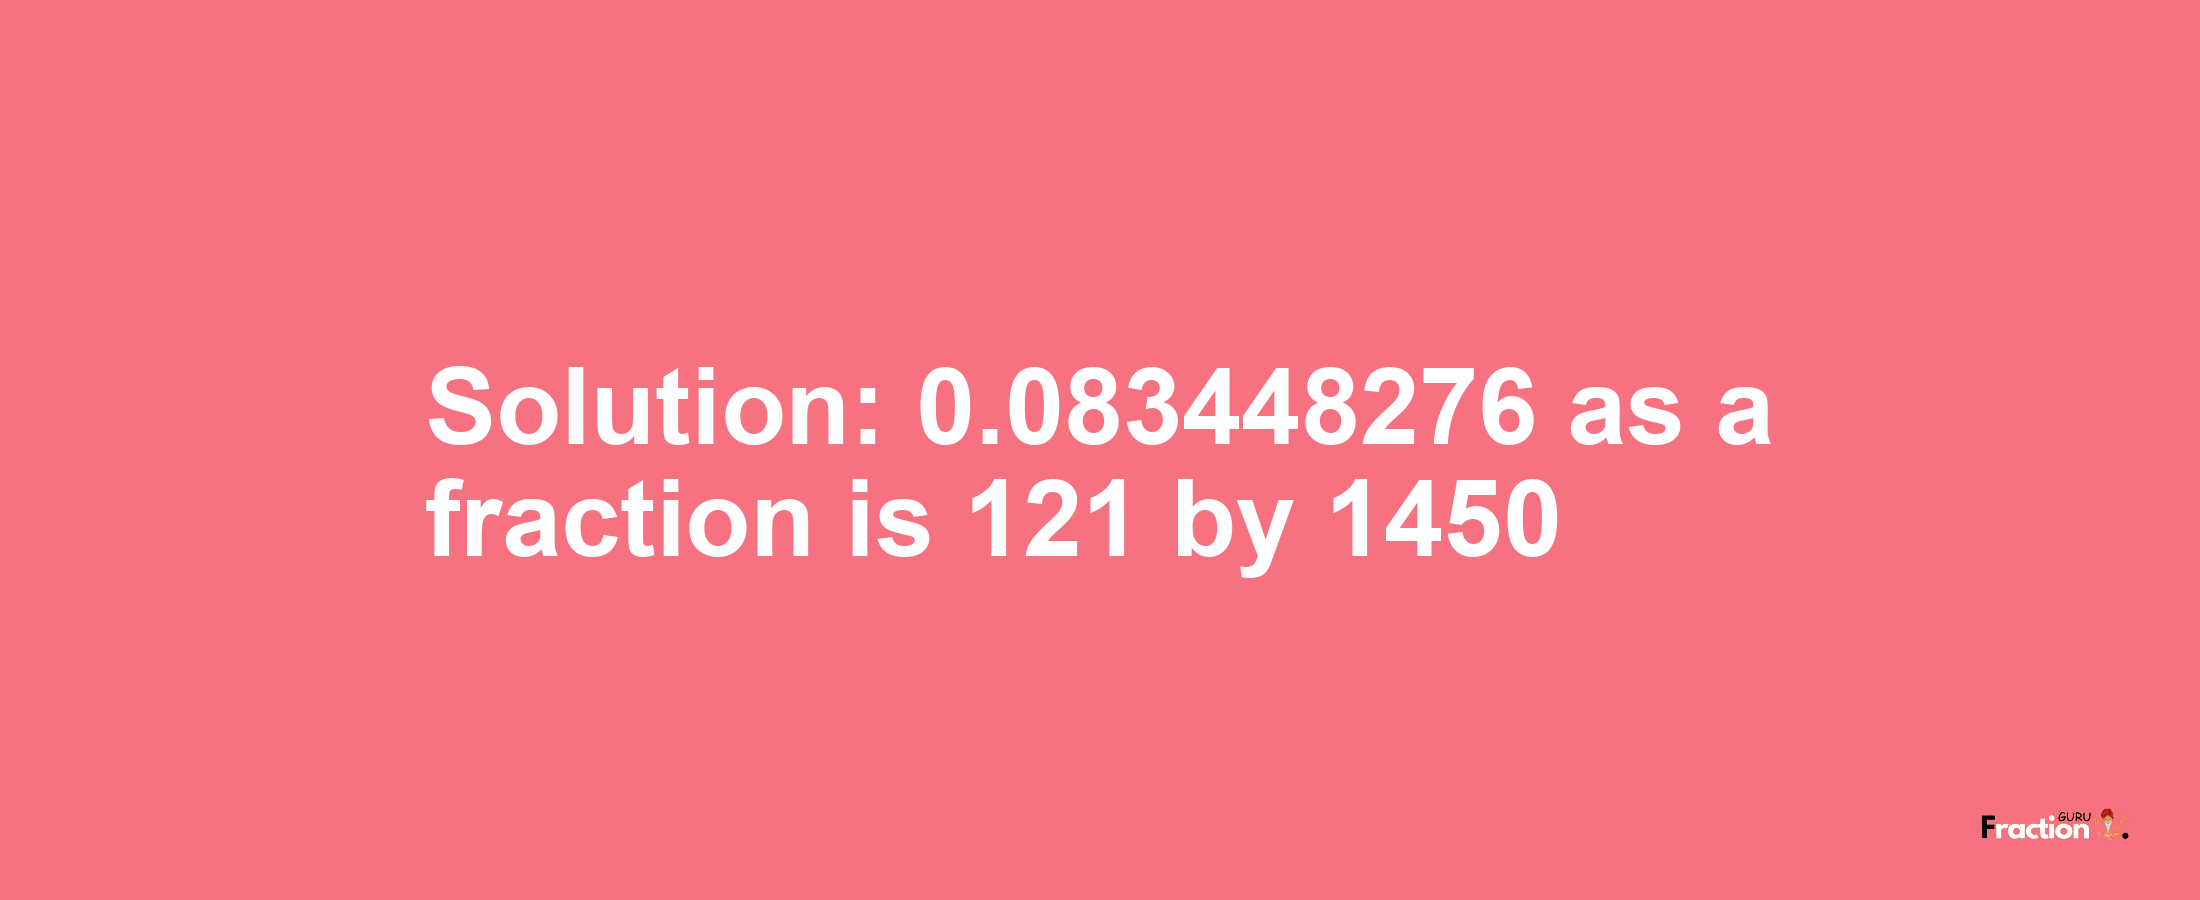 Solution:0.083448276 as a fraction is 121/1450